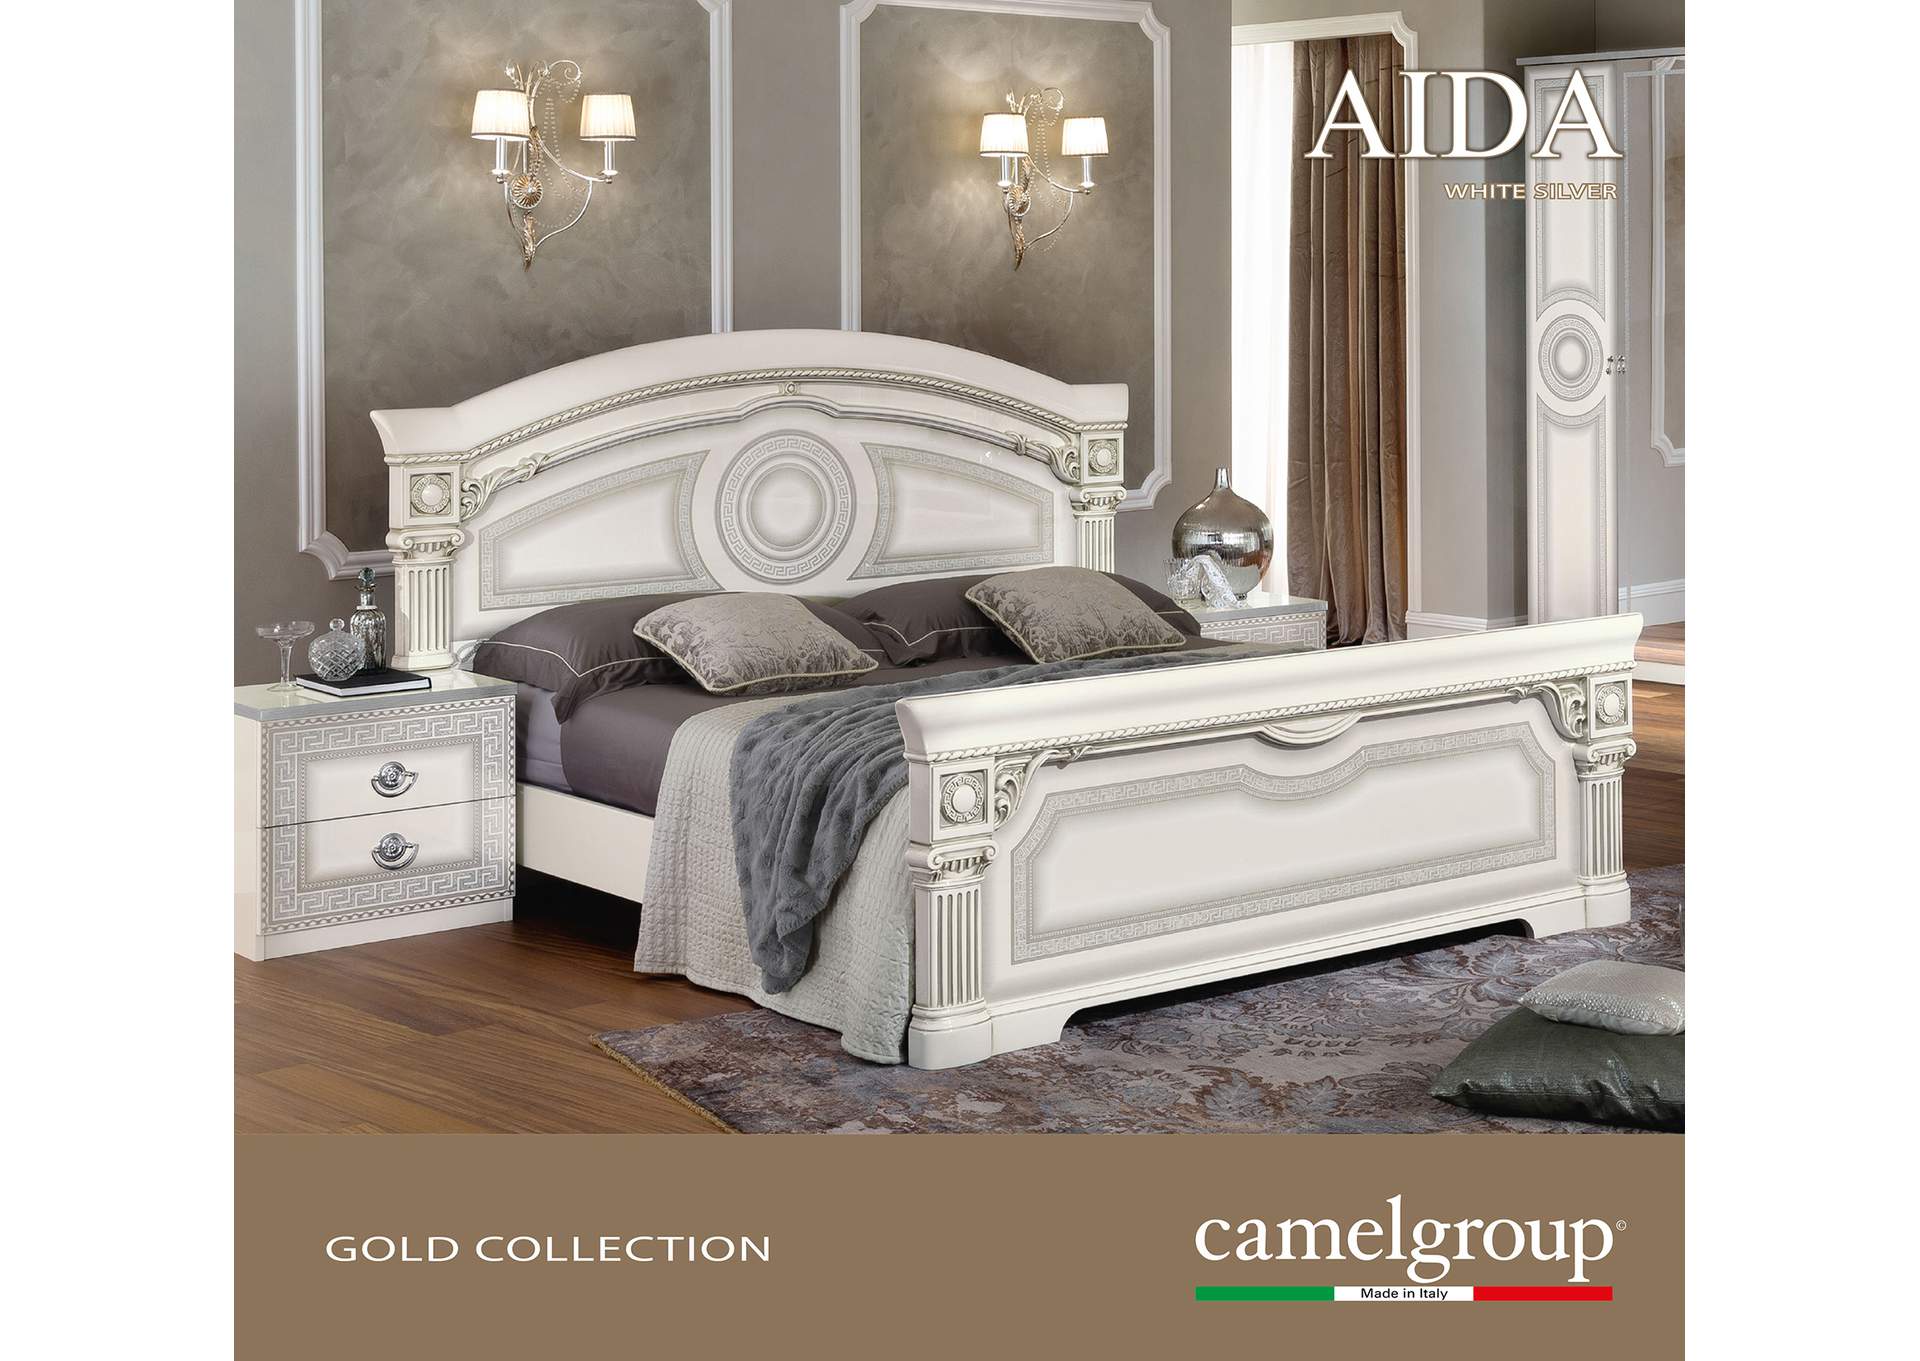 Aida Withe with Silver Vanity Dresser,ESF Wholesale Furniture